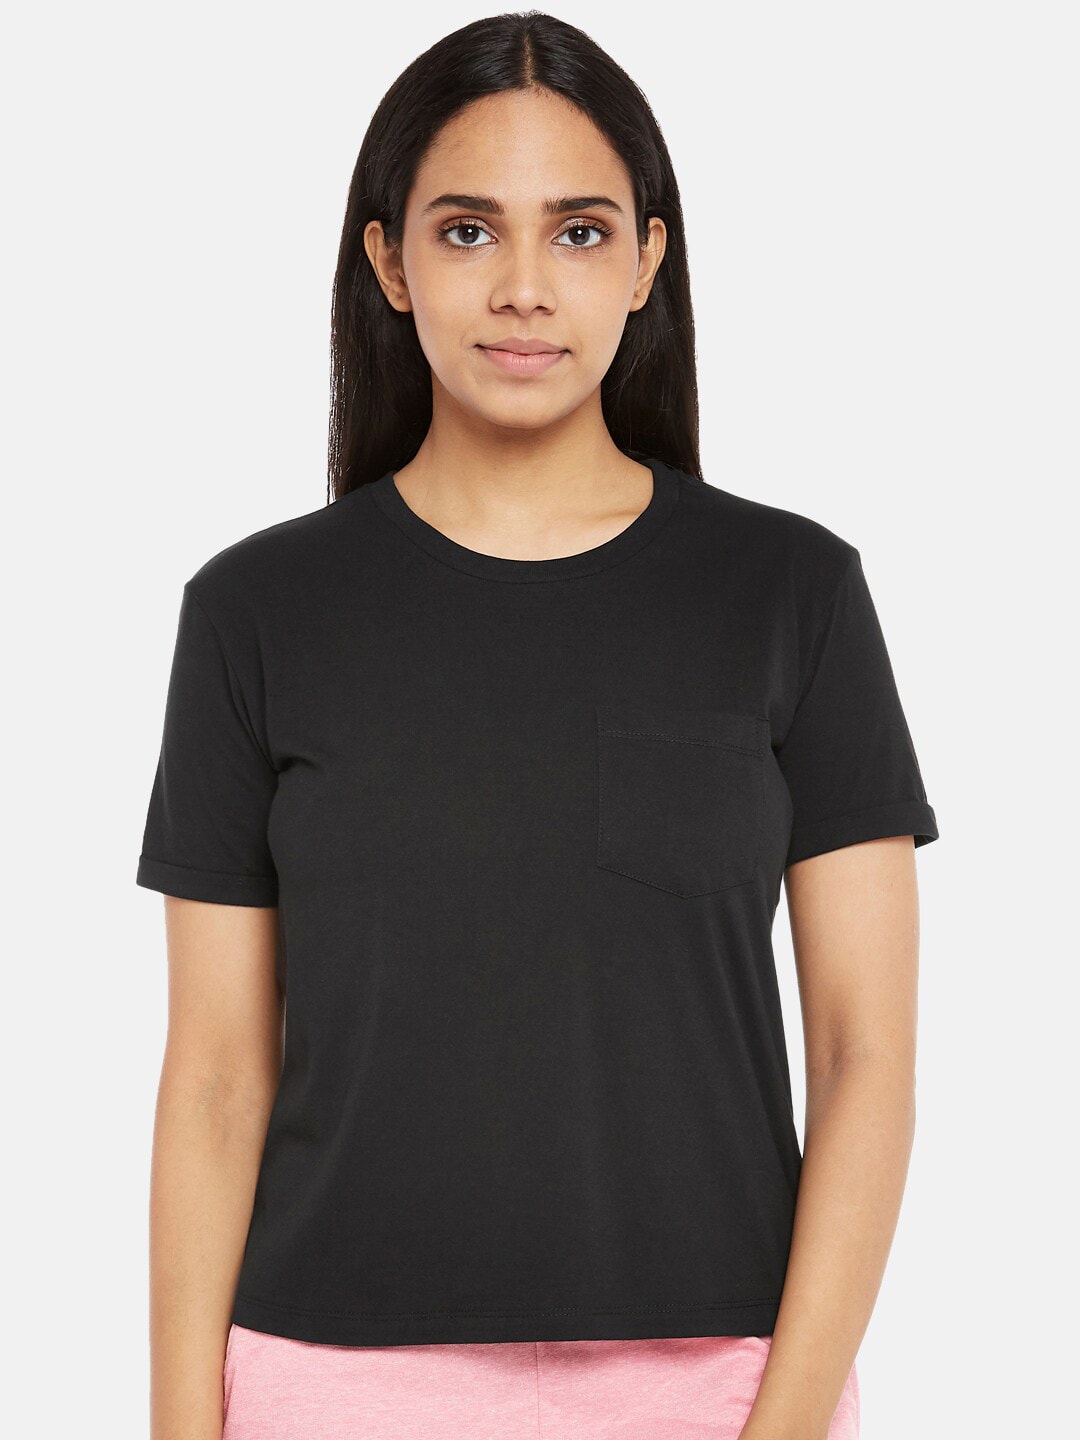 Dreamz by Pantaloons Women Black Pure Cotton Lounge T-shirt Price in India